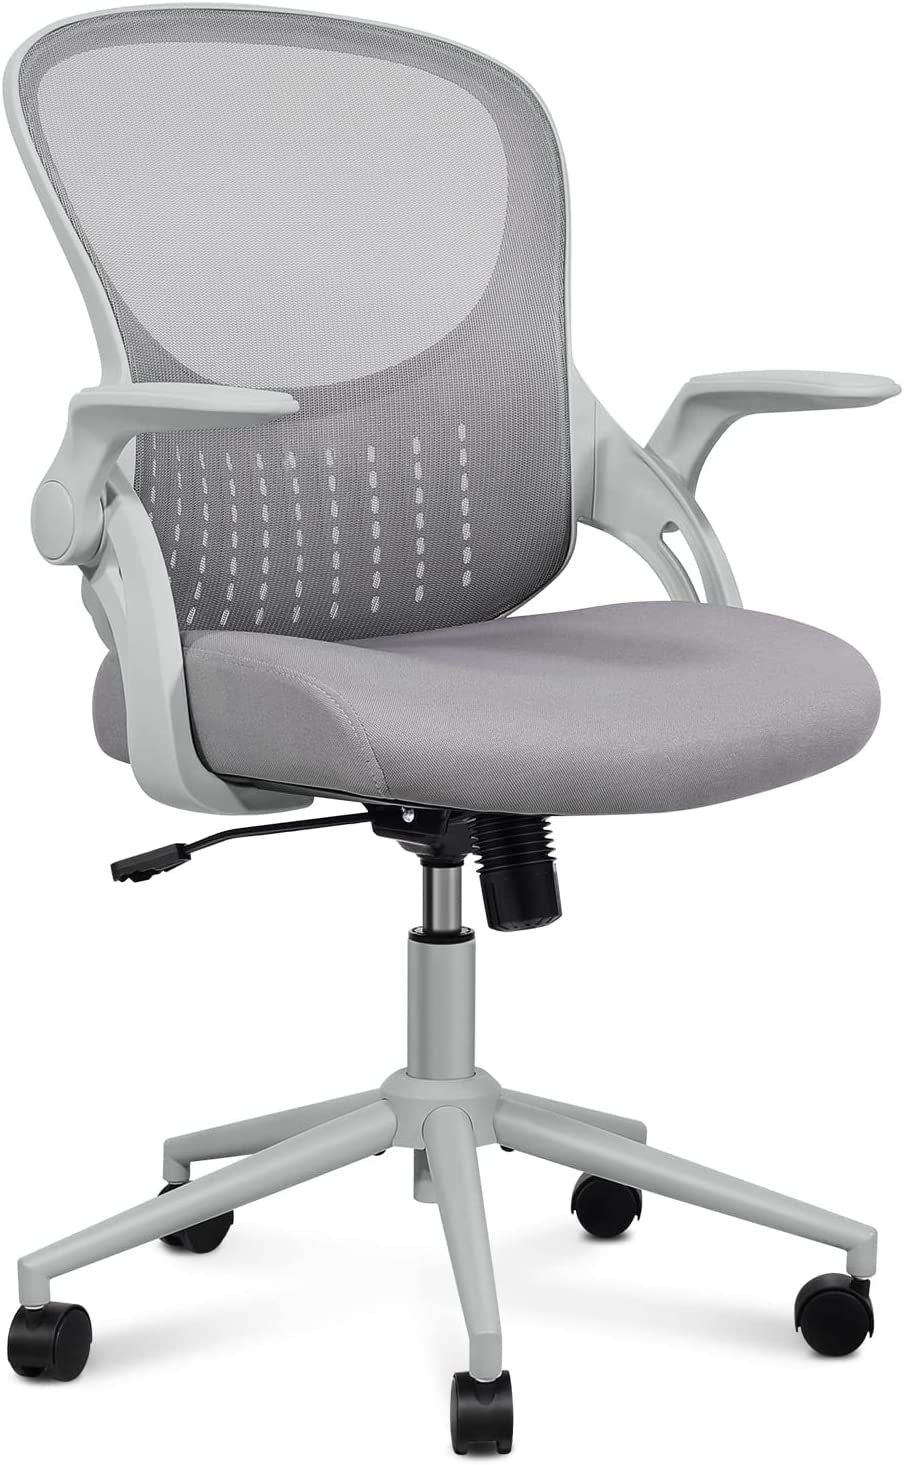 Primary image for SMUG Home Office Chair Ergonomic Desk Chair Mesh Computer Chair, up Arms, Grey